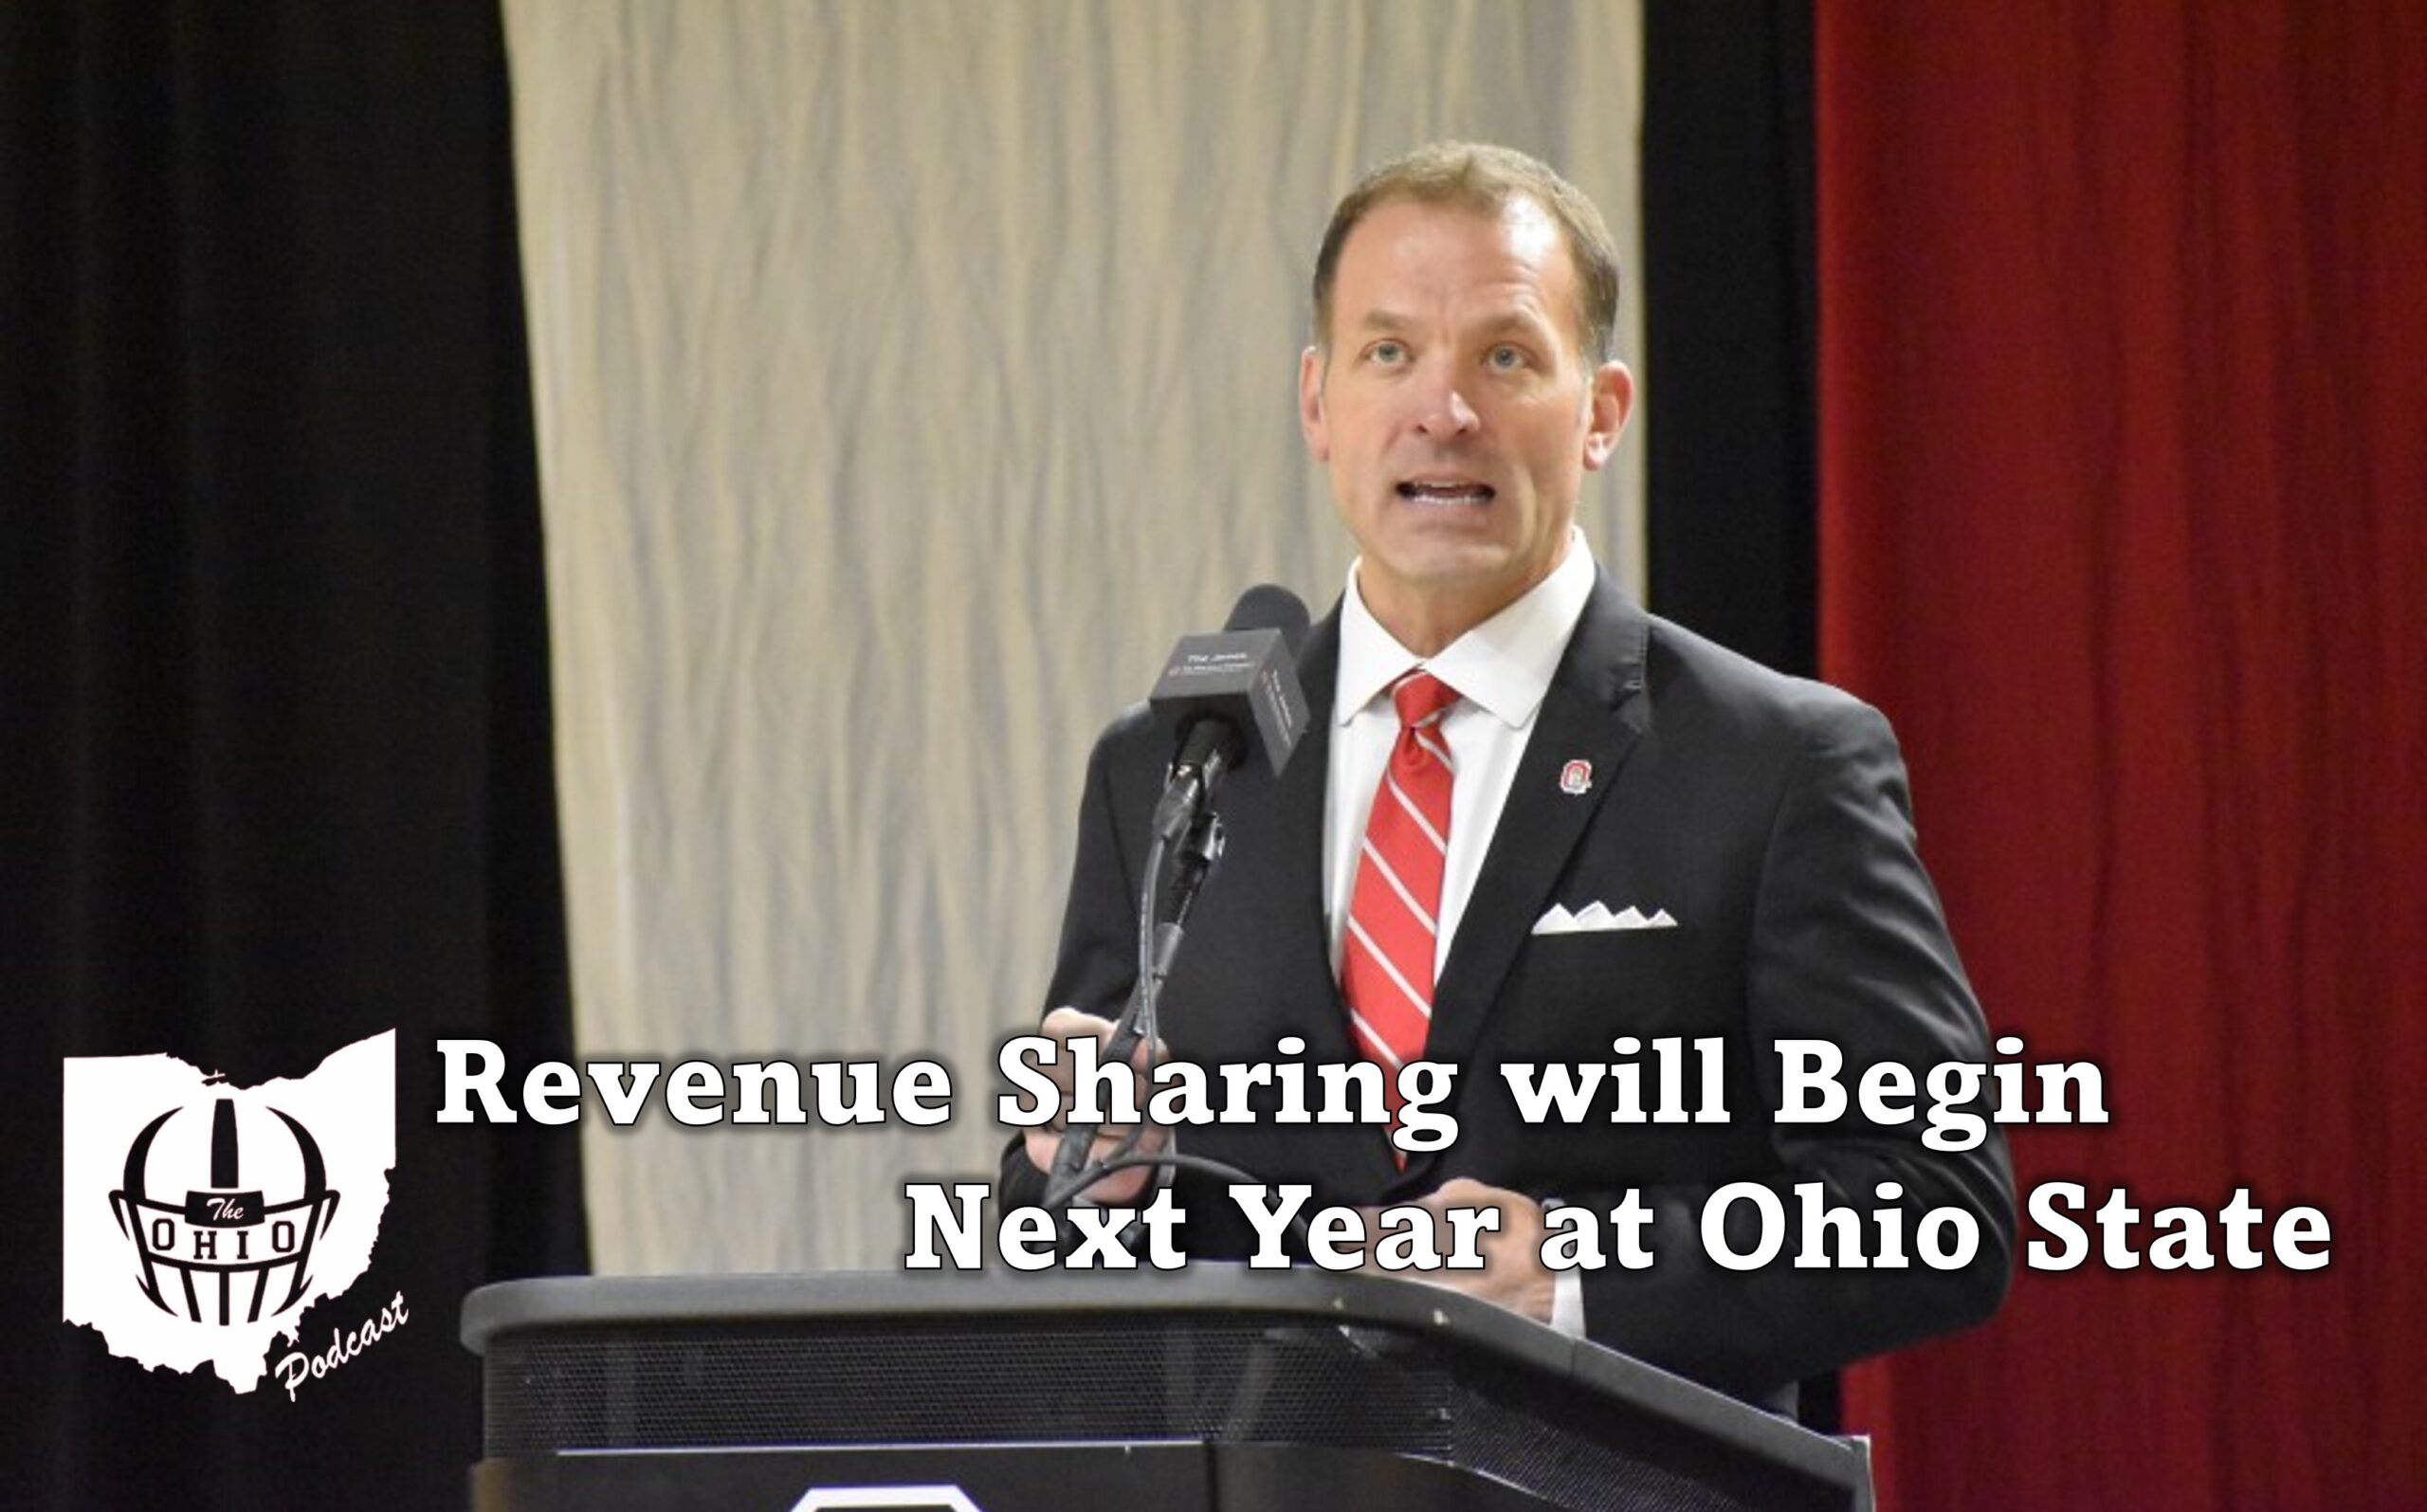 Revenue Sharing will Begin Next Year at Ohio State